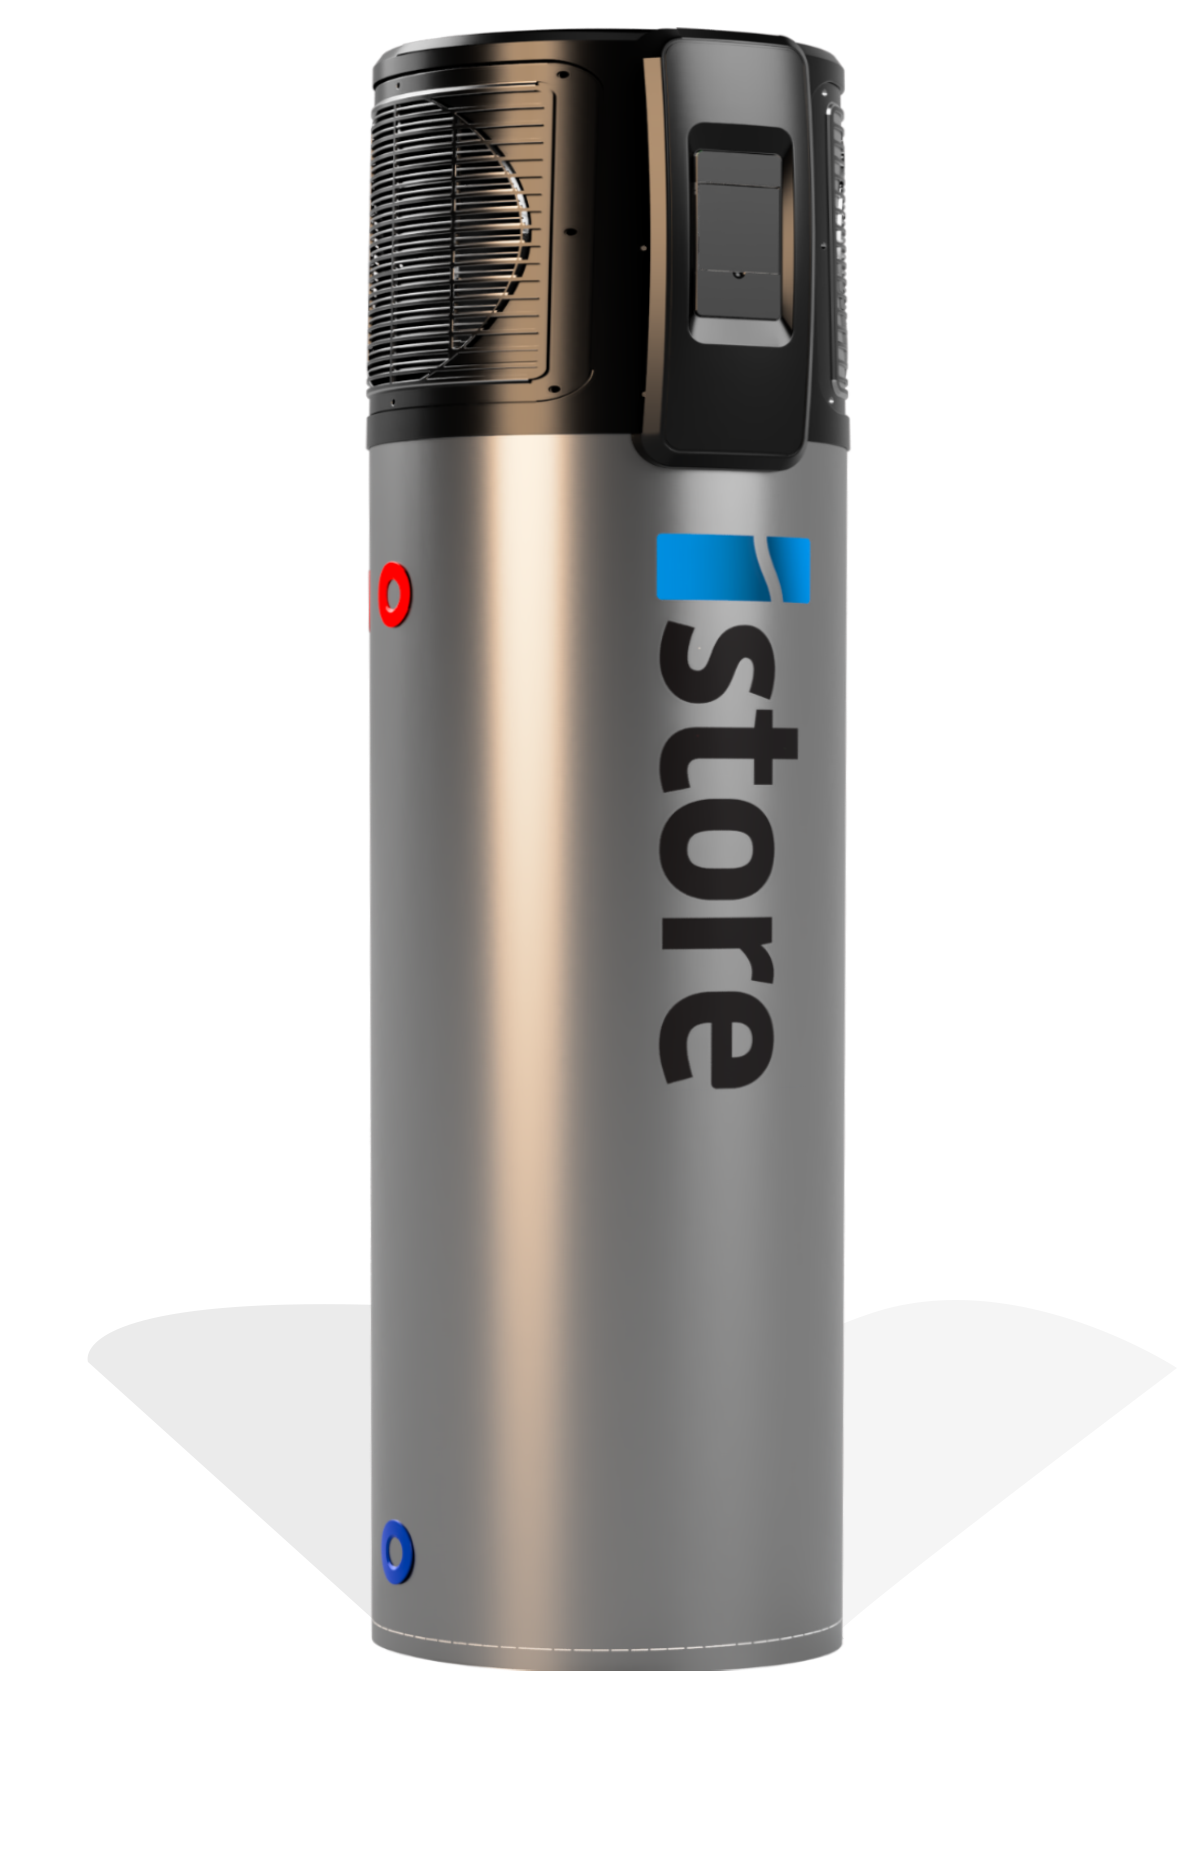 180l istore air to energy hot water system final web v2